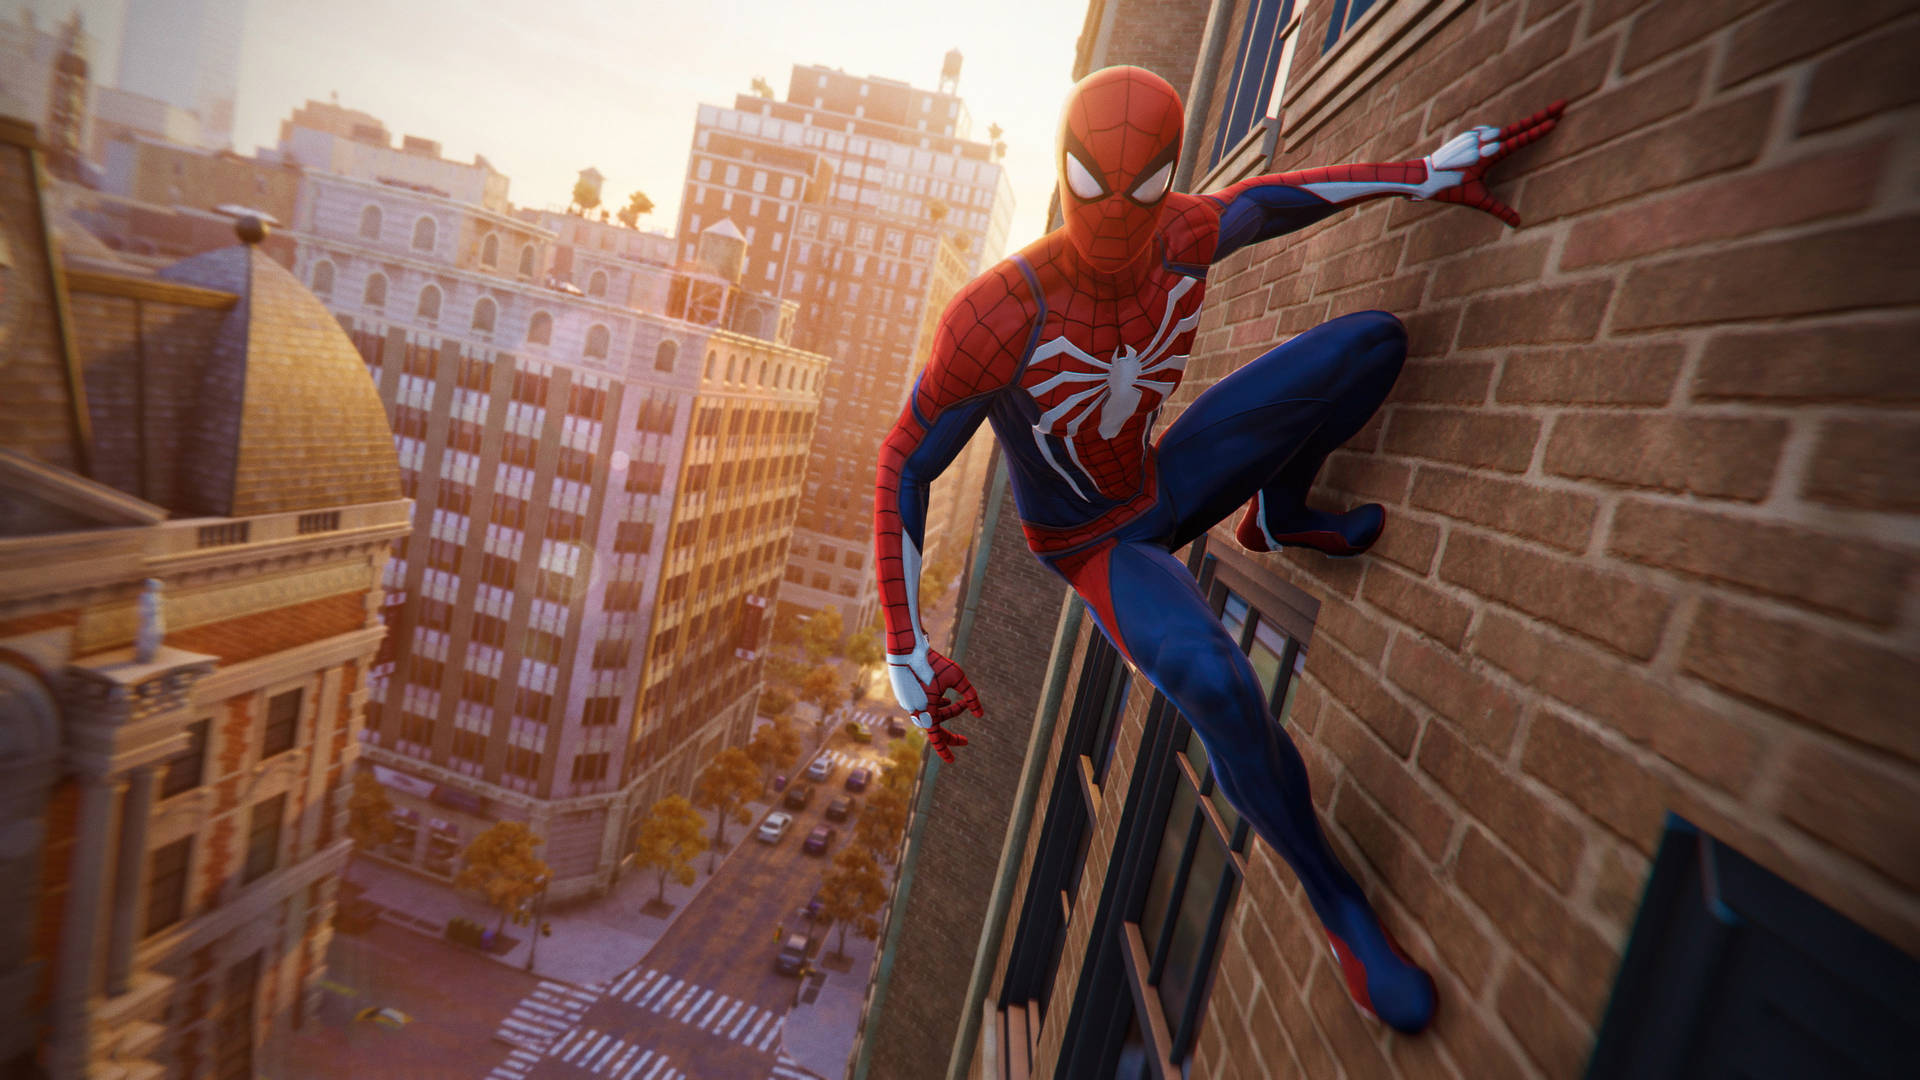 Spider-Man On The Wall 1080p Gaming